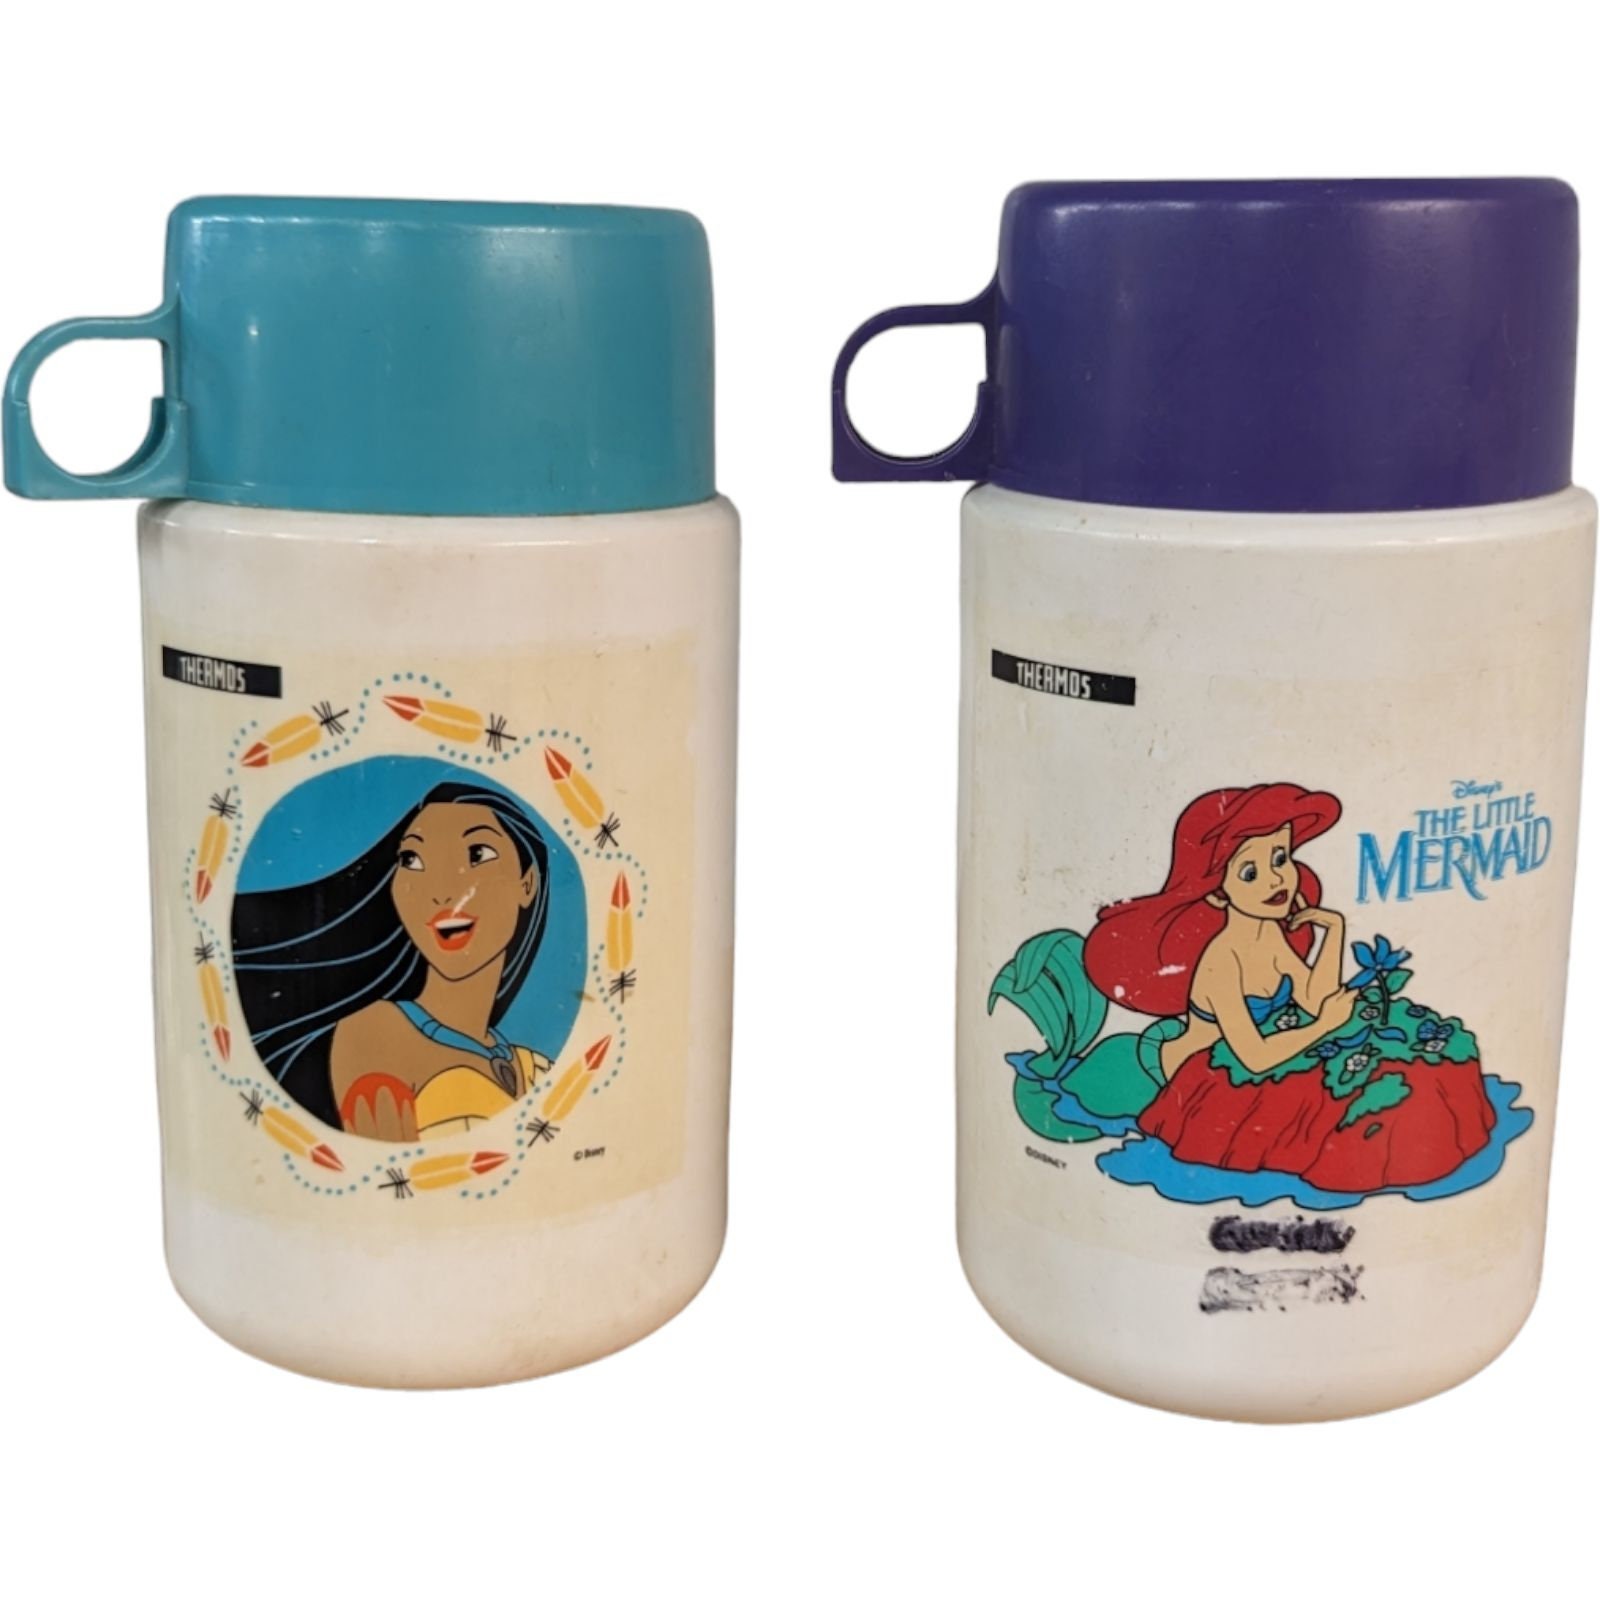 Thermos Kids' Soft Lunch Kit/Insulated Lunch Box,Mermaid,2021 Edition, Back  to School